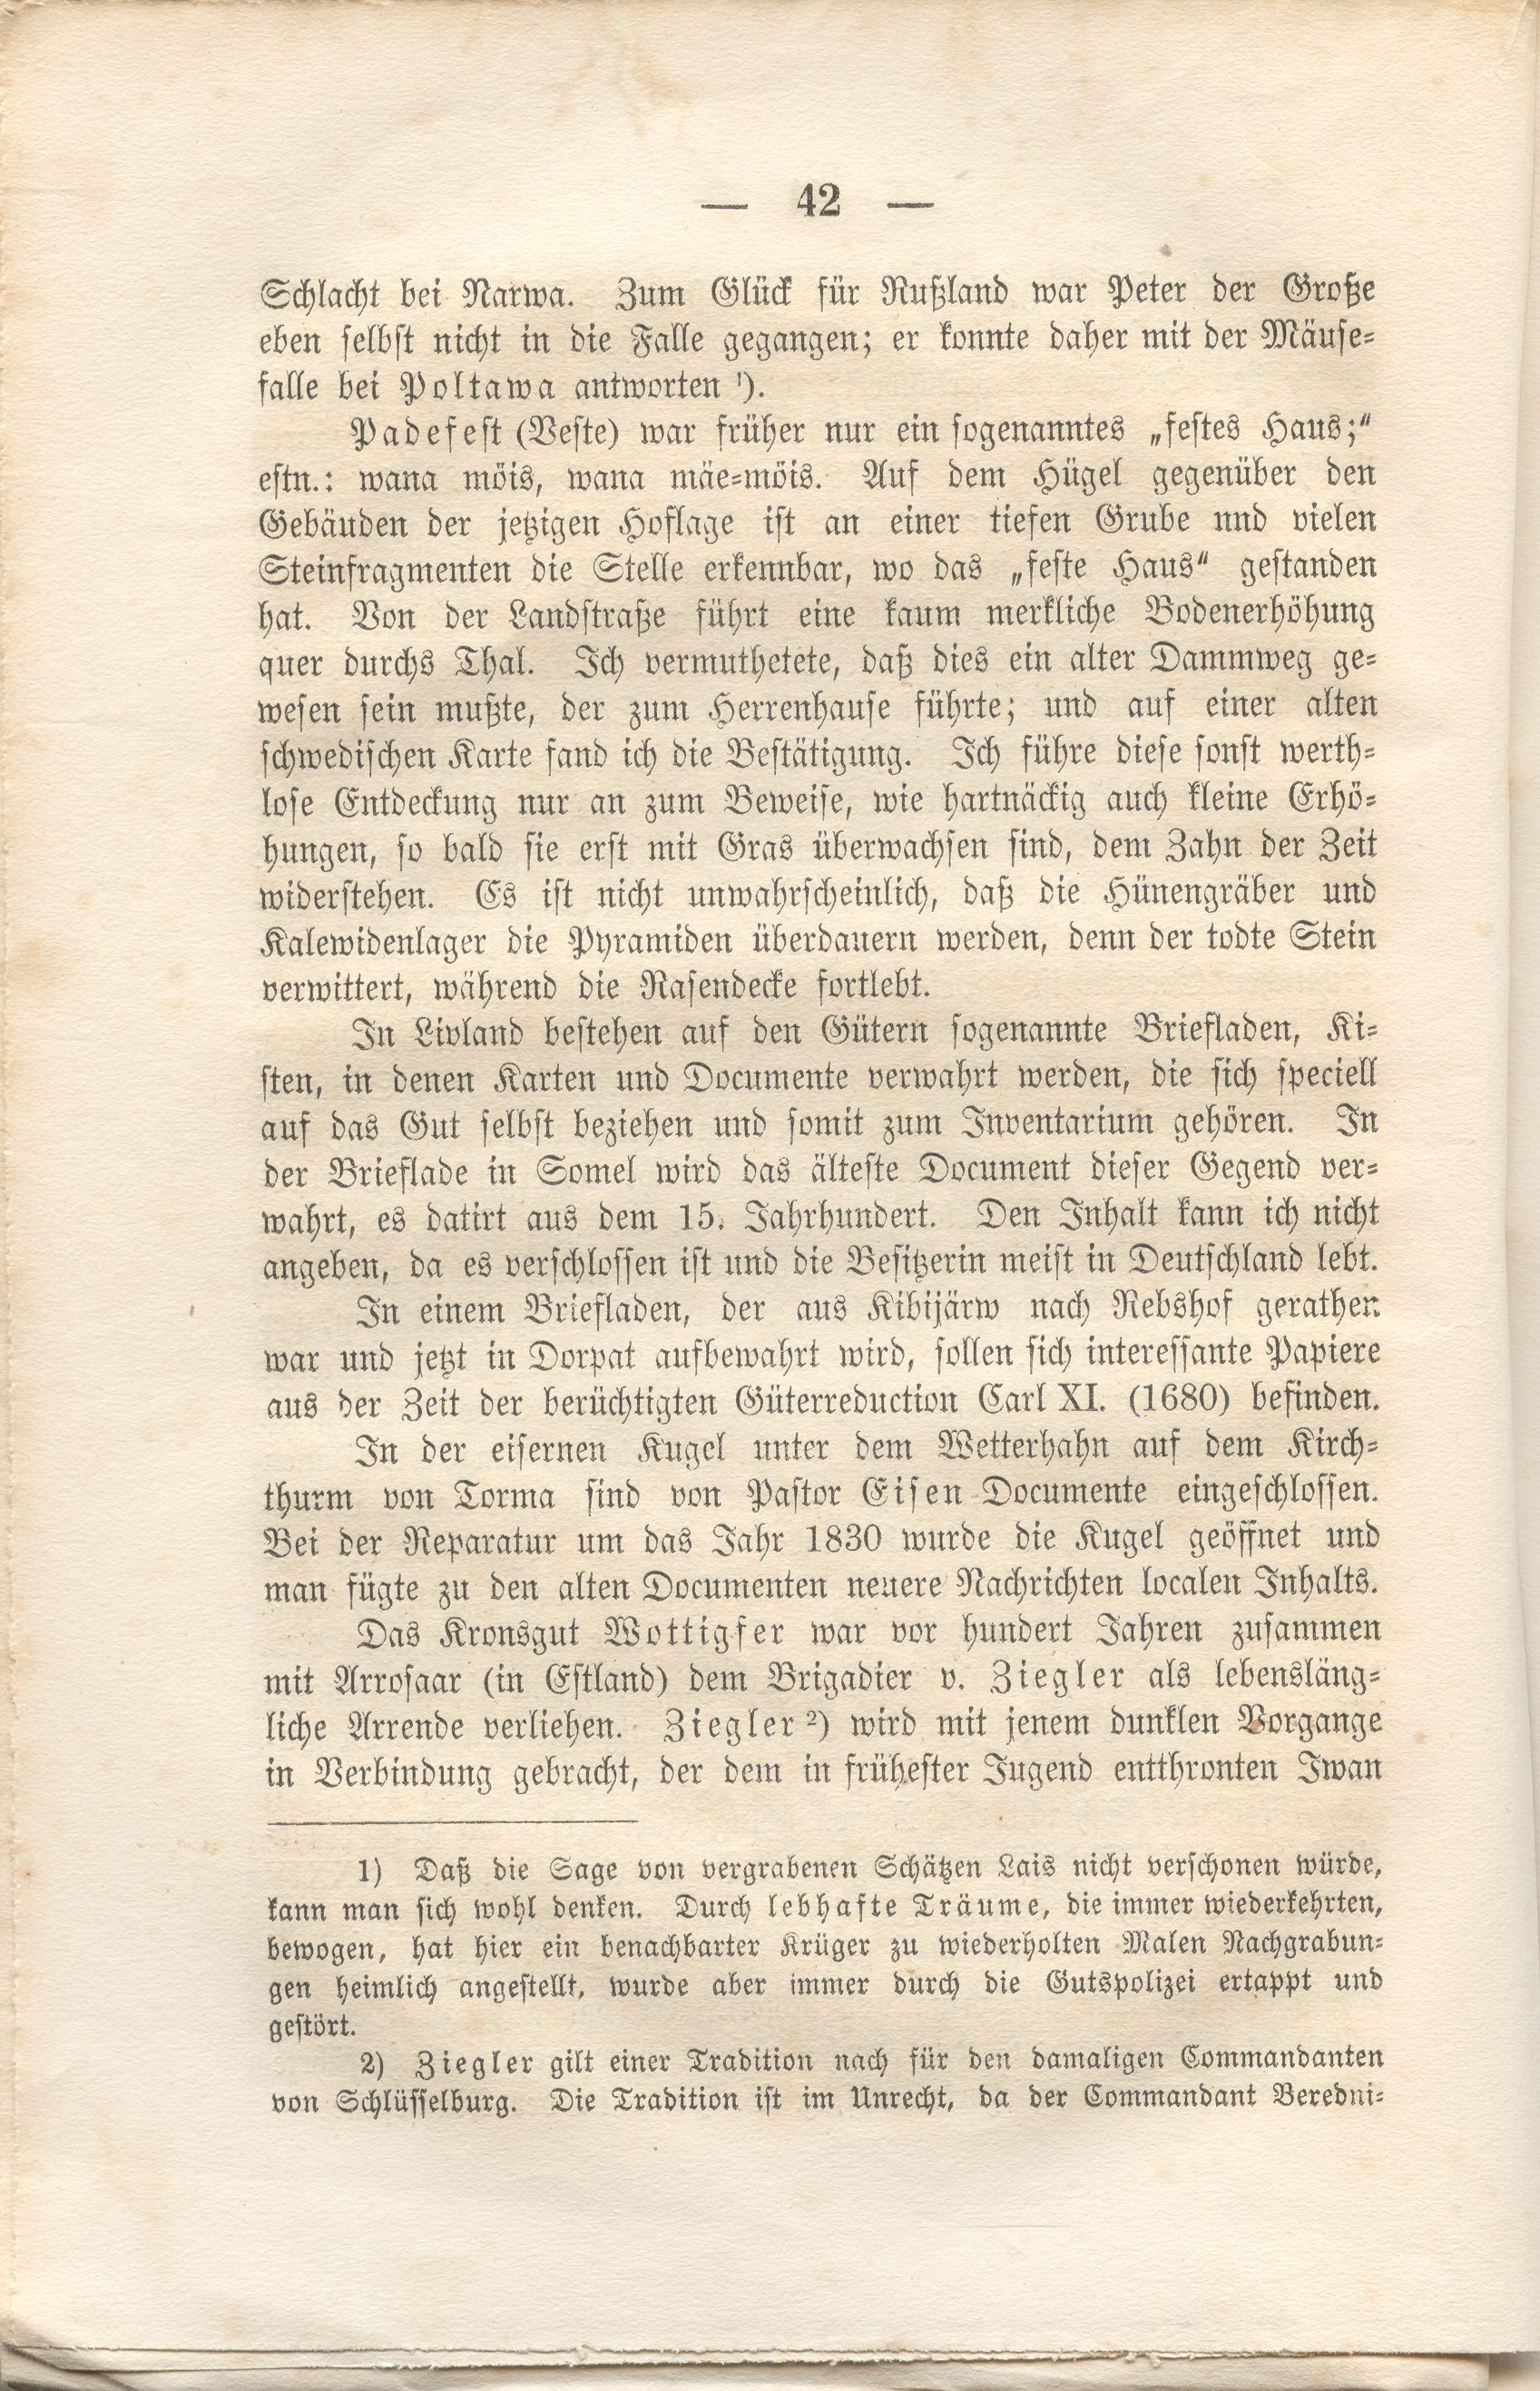 Wagien (1868) | 46. (42) Main body of text